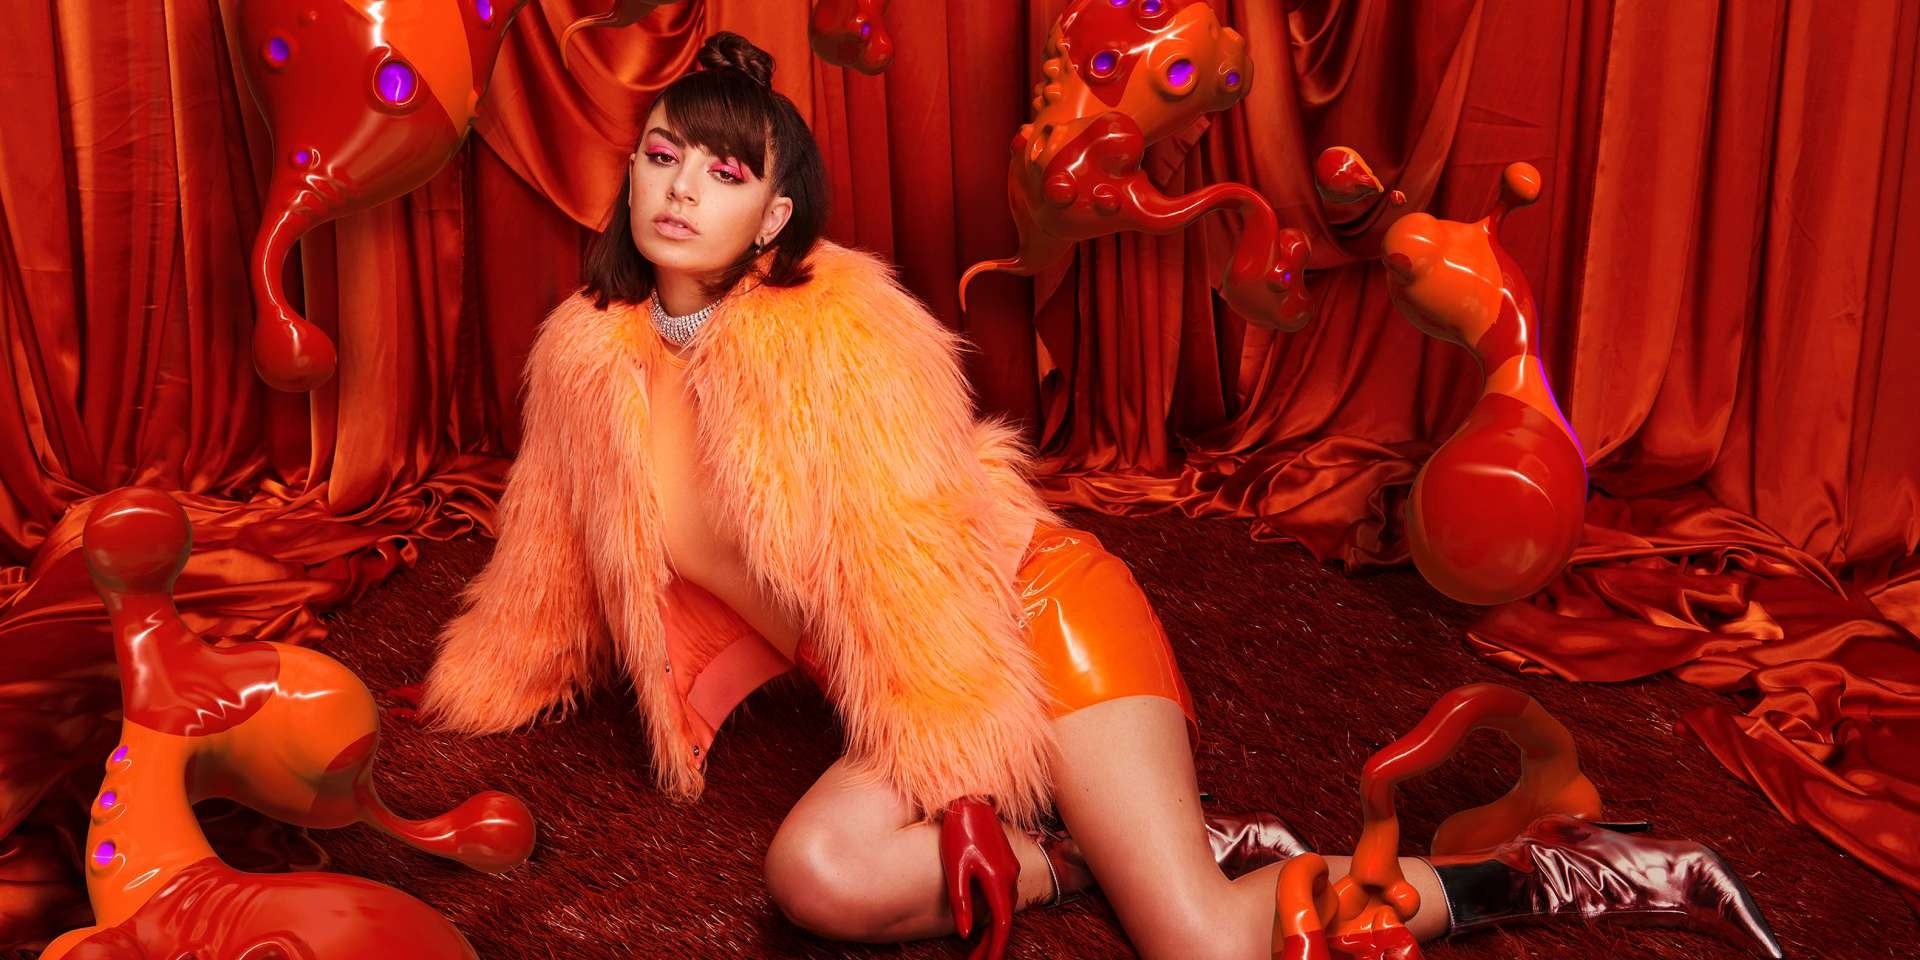 Charli XCX details "experimental" new album, says she went “all in”